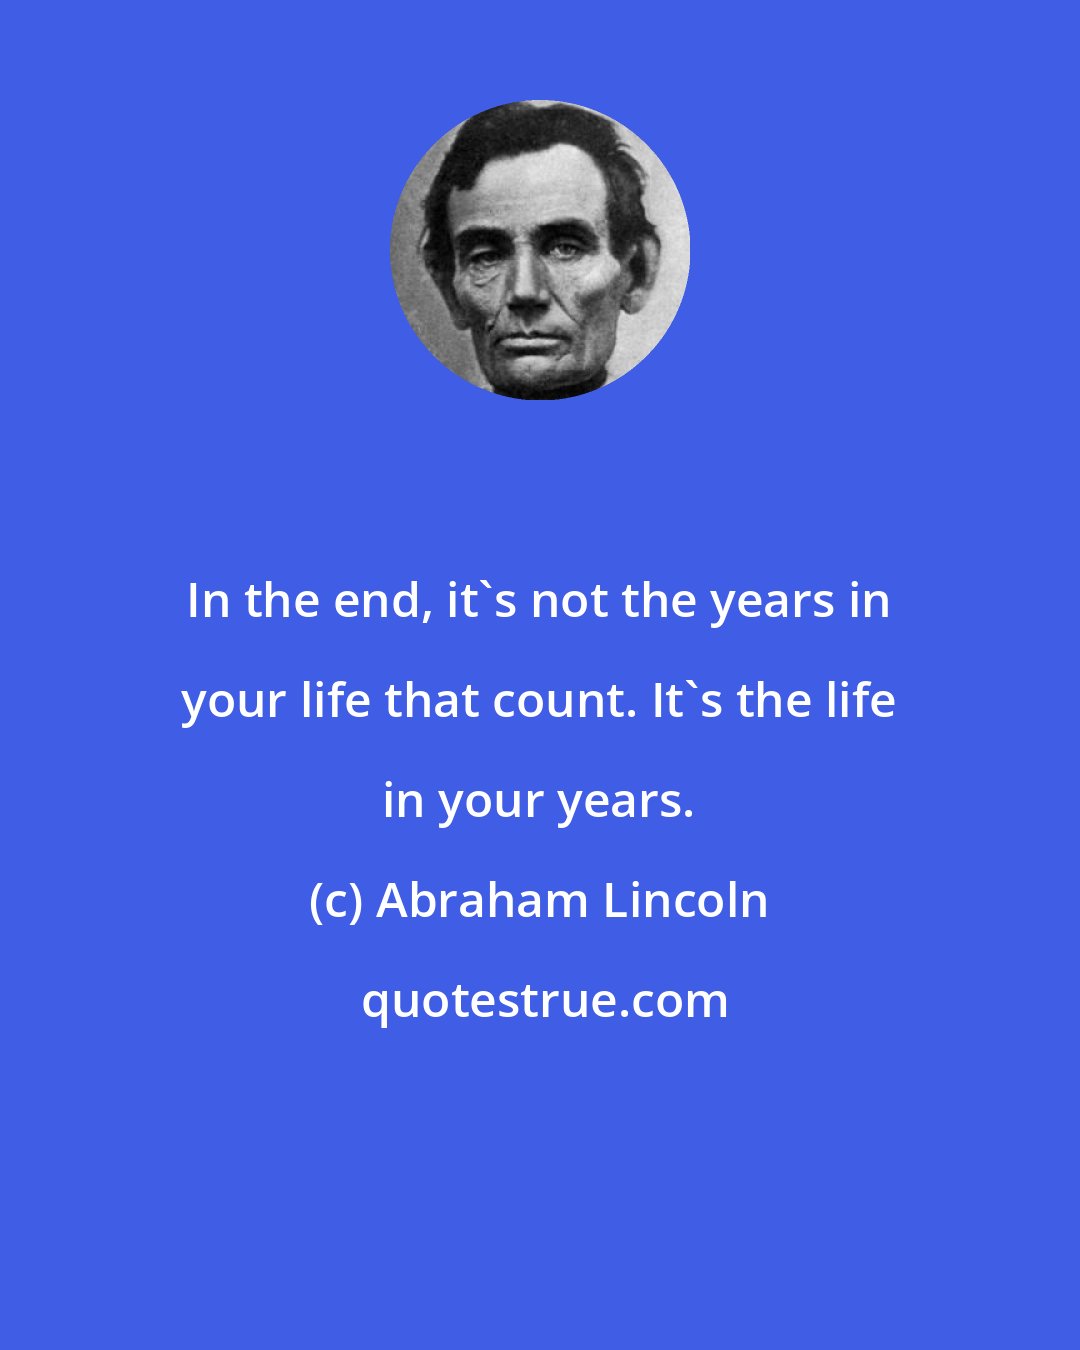 Abraham Lincoln: In the end, it's not the years in your life that count. It's the life in your years.